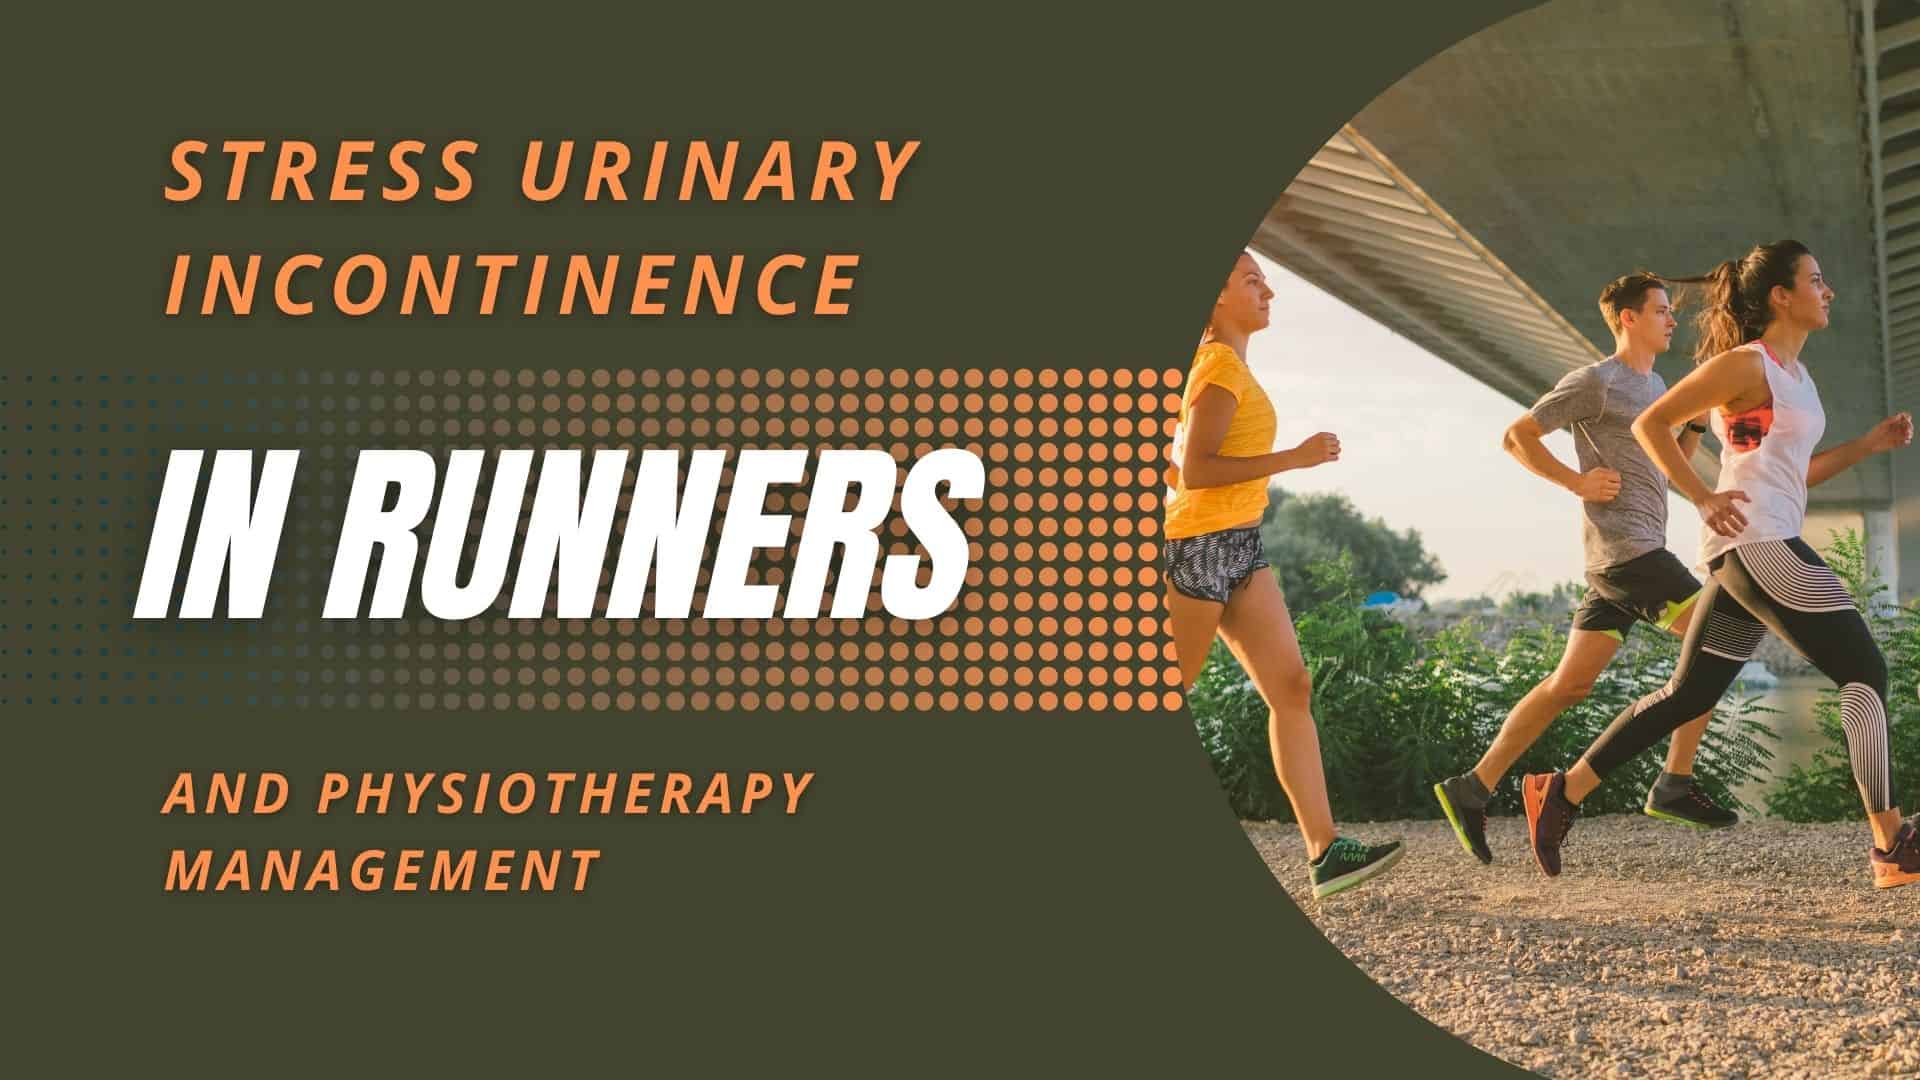 Stress Urinary Incontinence in Runners and Physiotherapy Management